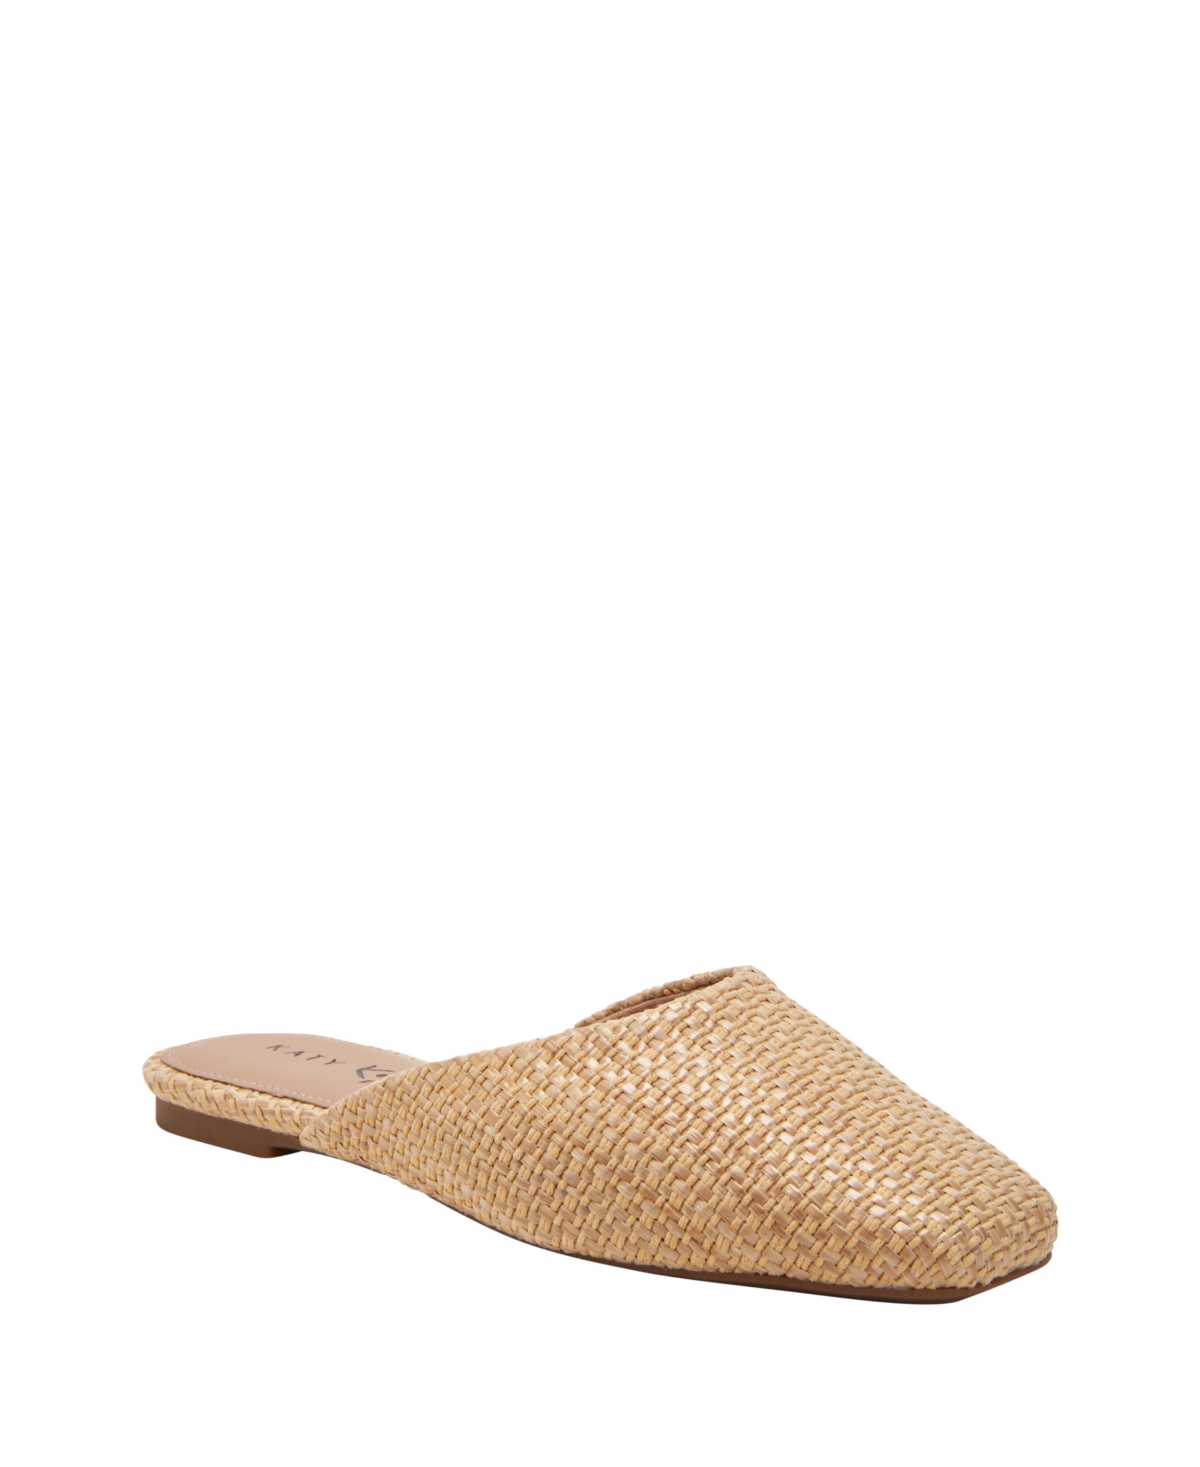 Katy Perry Women's Evie Square Toe Mules In Natural